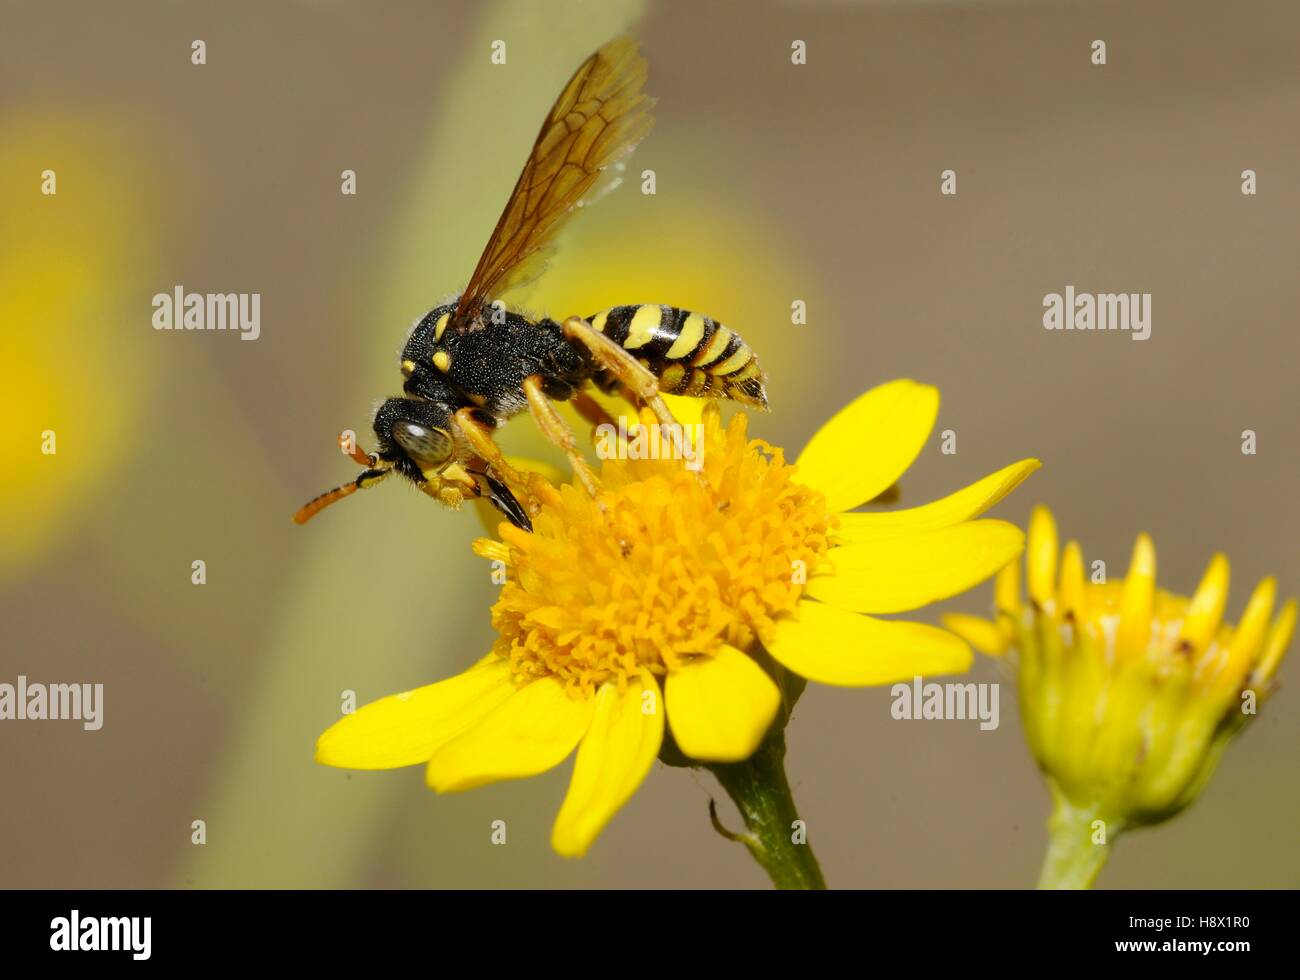 Nomad Bee (Nomada goodeniana) on Pulicaire (Pulicaria dysenterica) 2015 July 18 Northern Vosges Regional Nature Park France Stock Photo